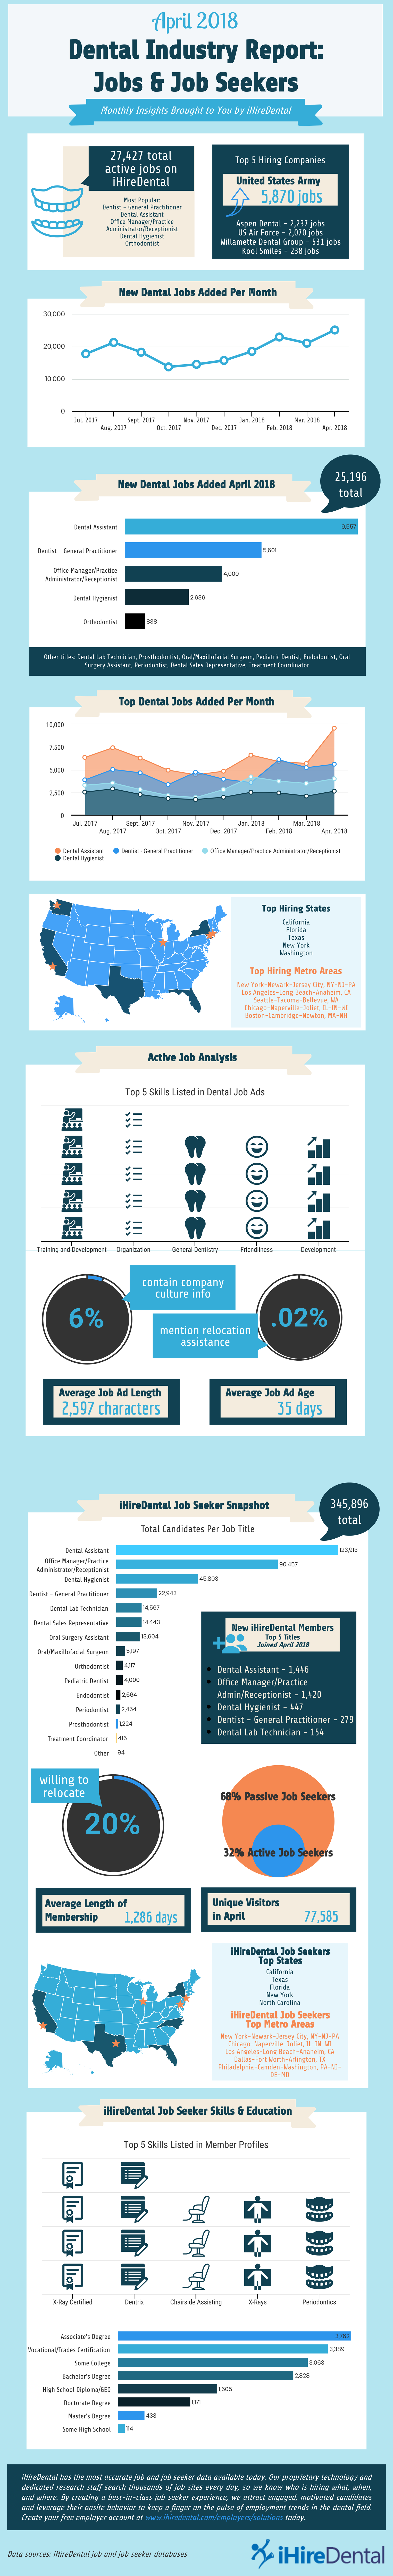 ihiredental april 2018 dental industry report infographic